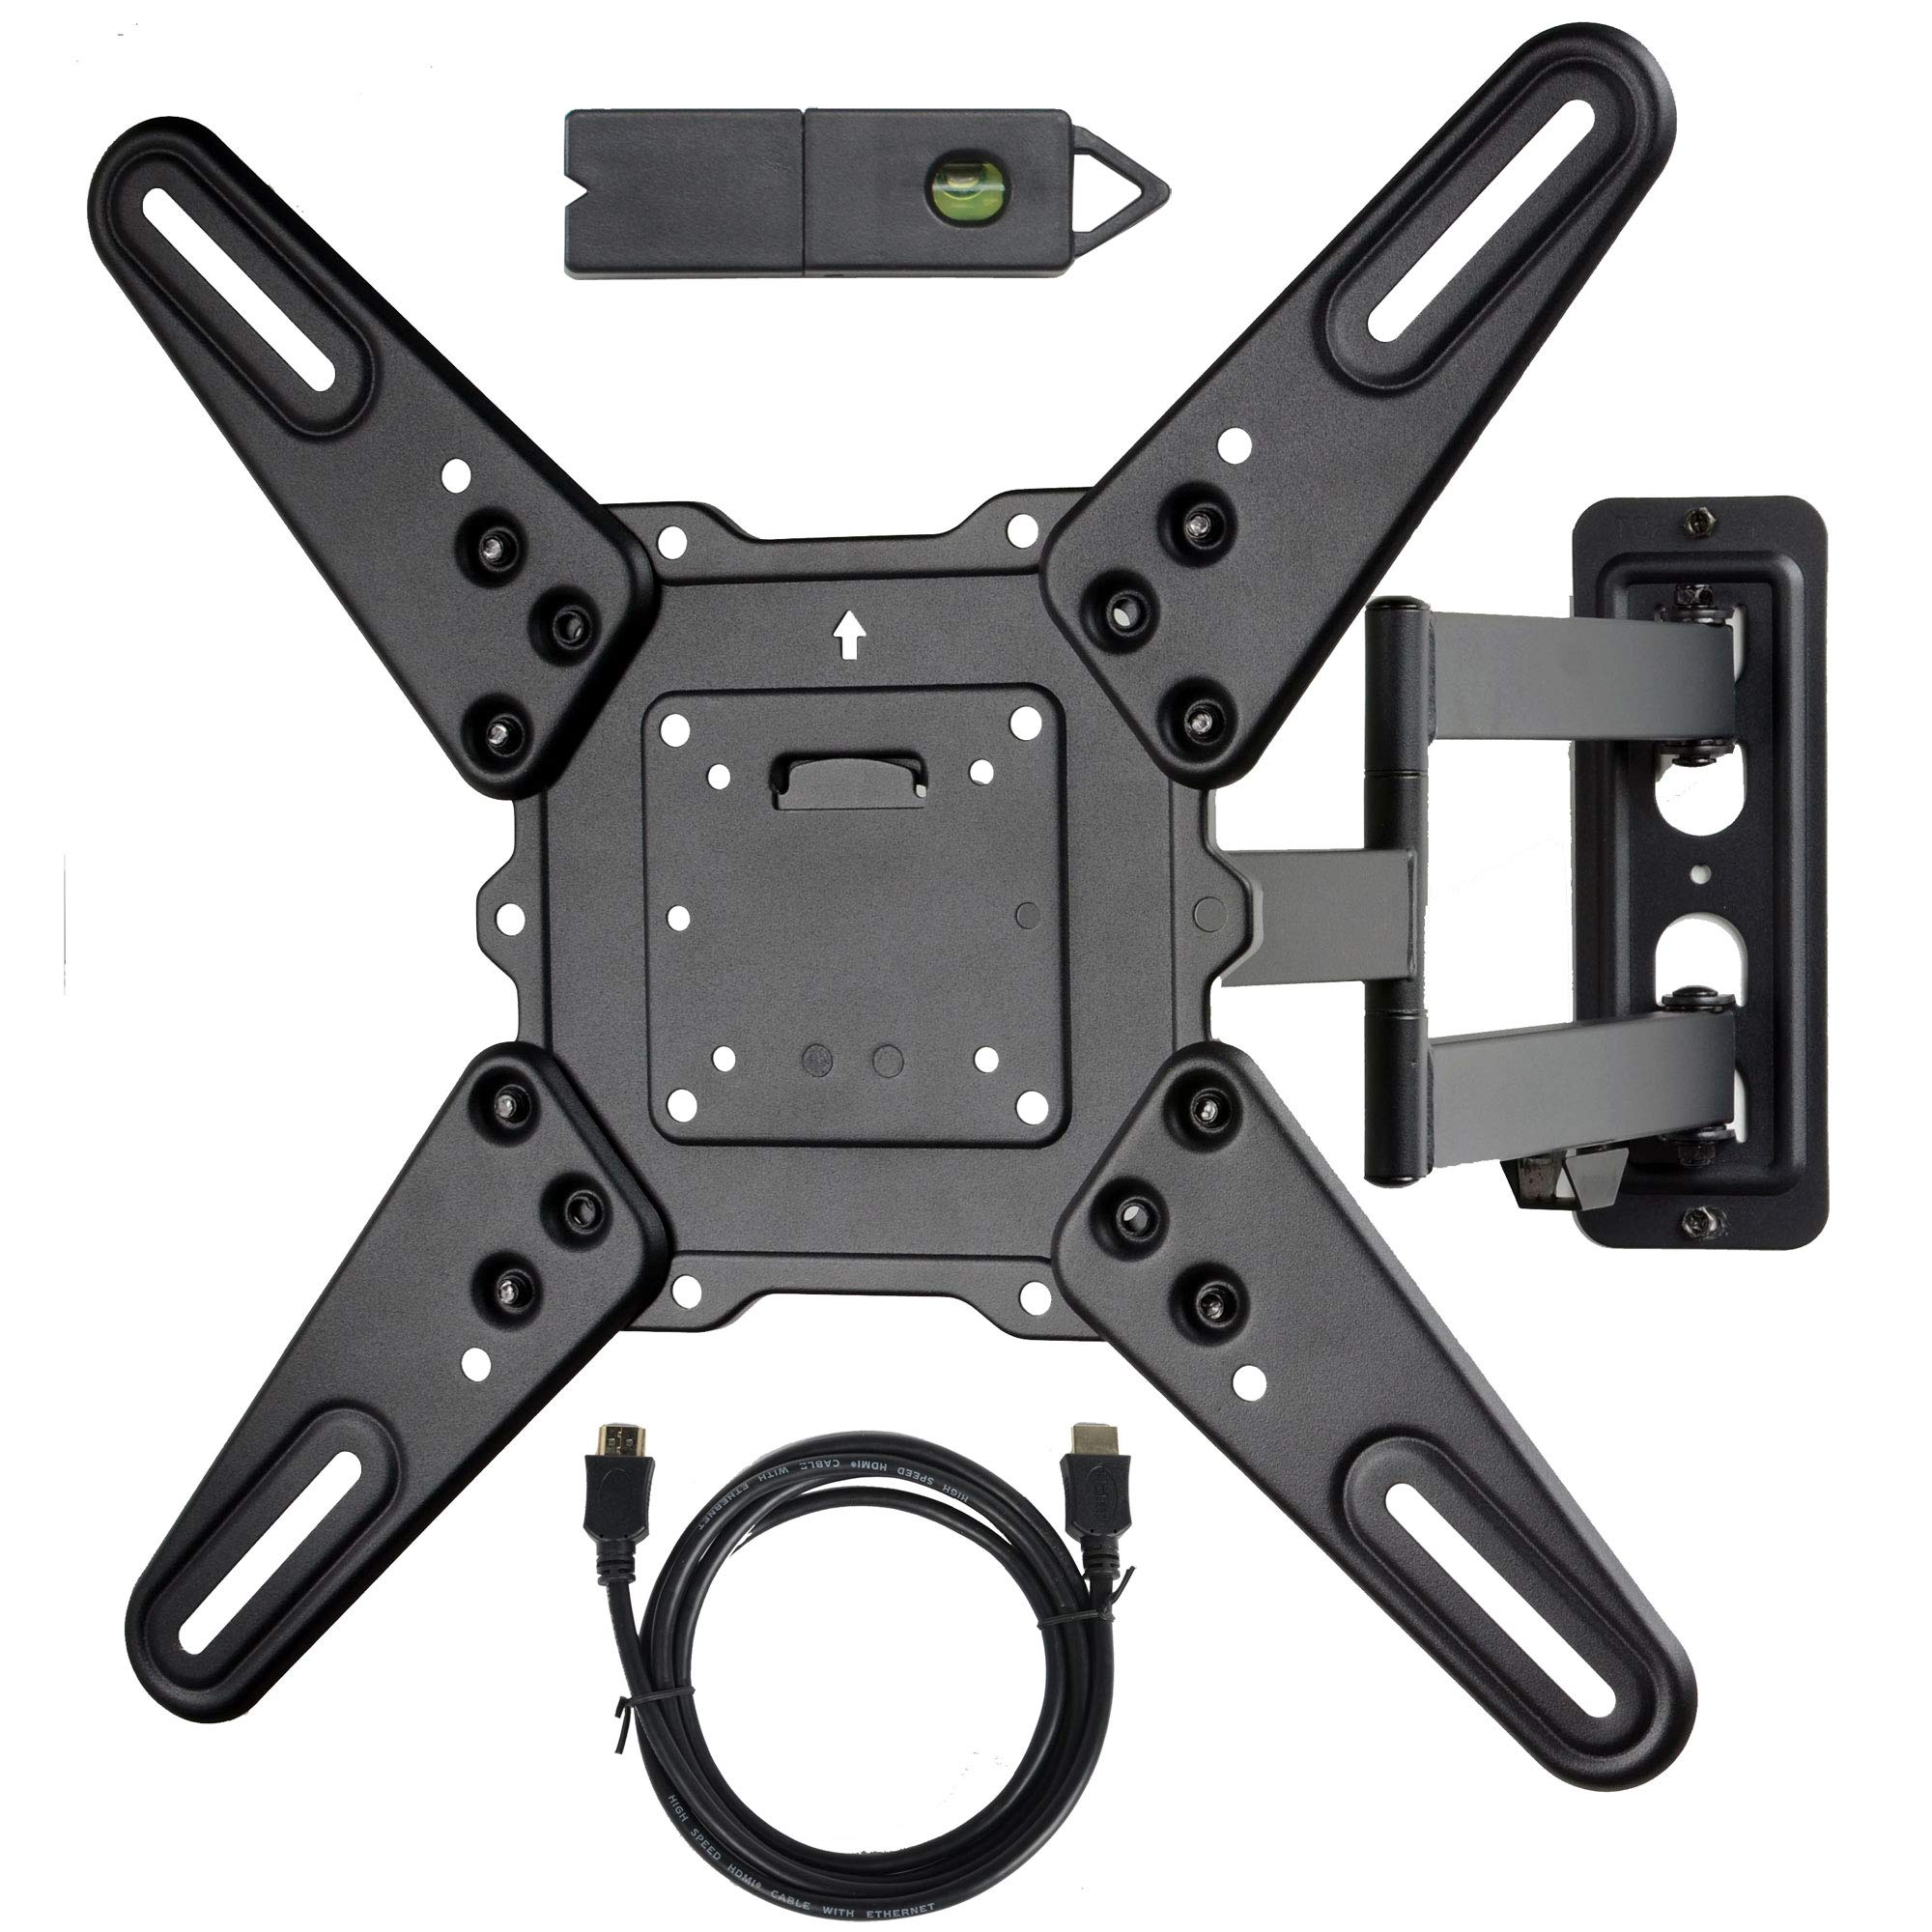 Book Cover VideoSecu ML531BE2 TV Wall Mount kit with Free Magnetic Stud Finder and HDMI Cable for Most 26-55 TV and New LED UHD TV up to 60 inch 400x400 Full Motion with 20 inch Articulating Arm WT8